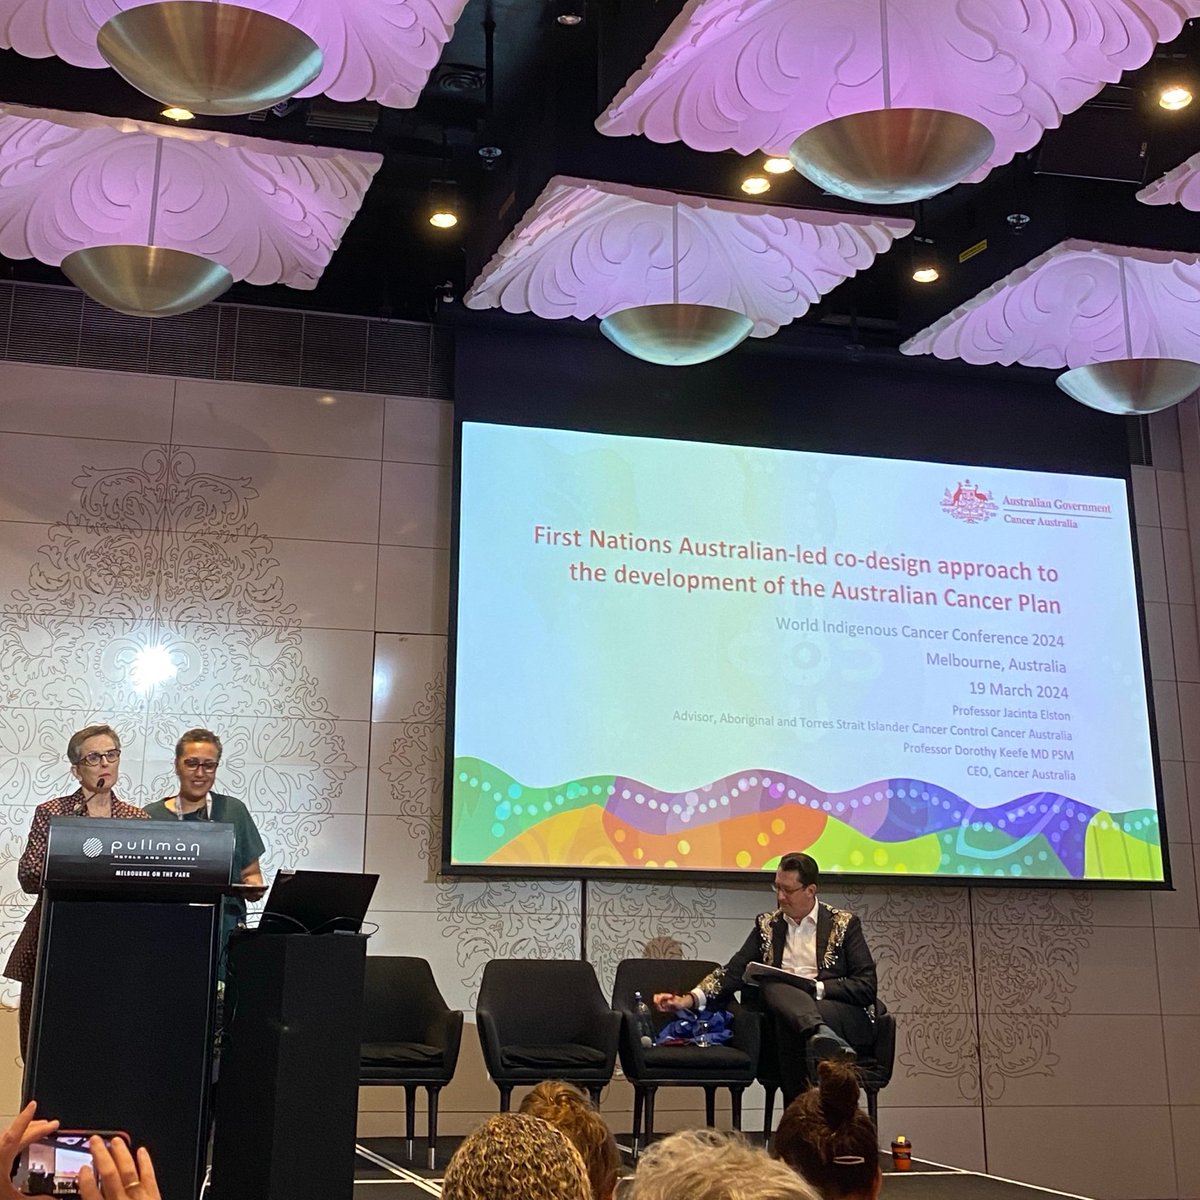 Prof Dorothy Keefe @CEOCancerAus and Prof Jacinta Elston presenting at the #WICC2024 on CA's First Nations Australian-led co-designed approach to the development of the #AustralianCancerPlan. For information, visit bit.ly/4cdrU4X